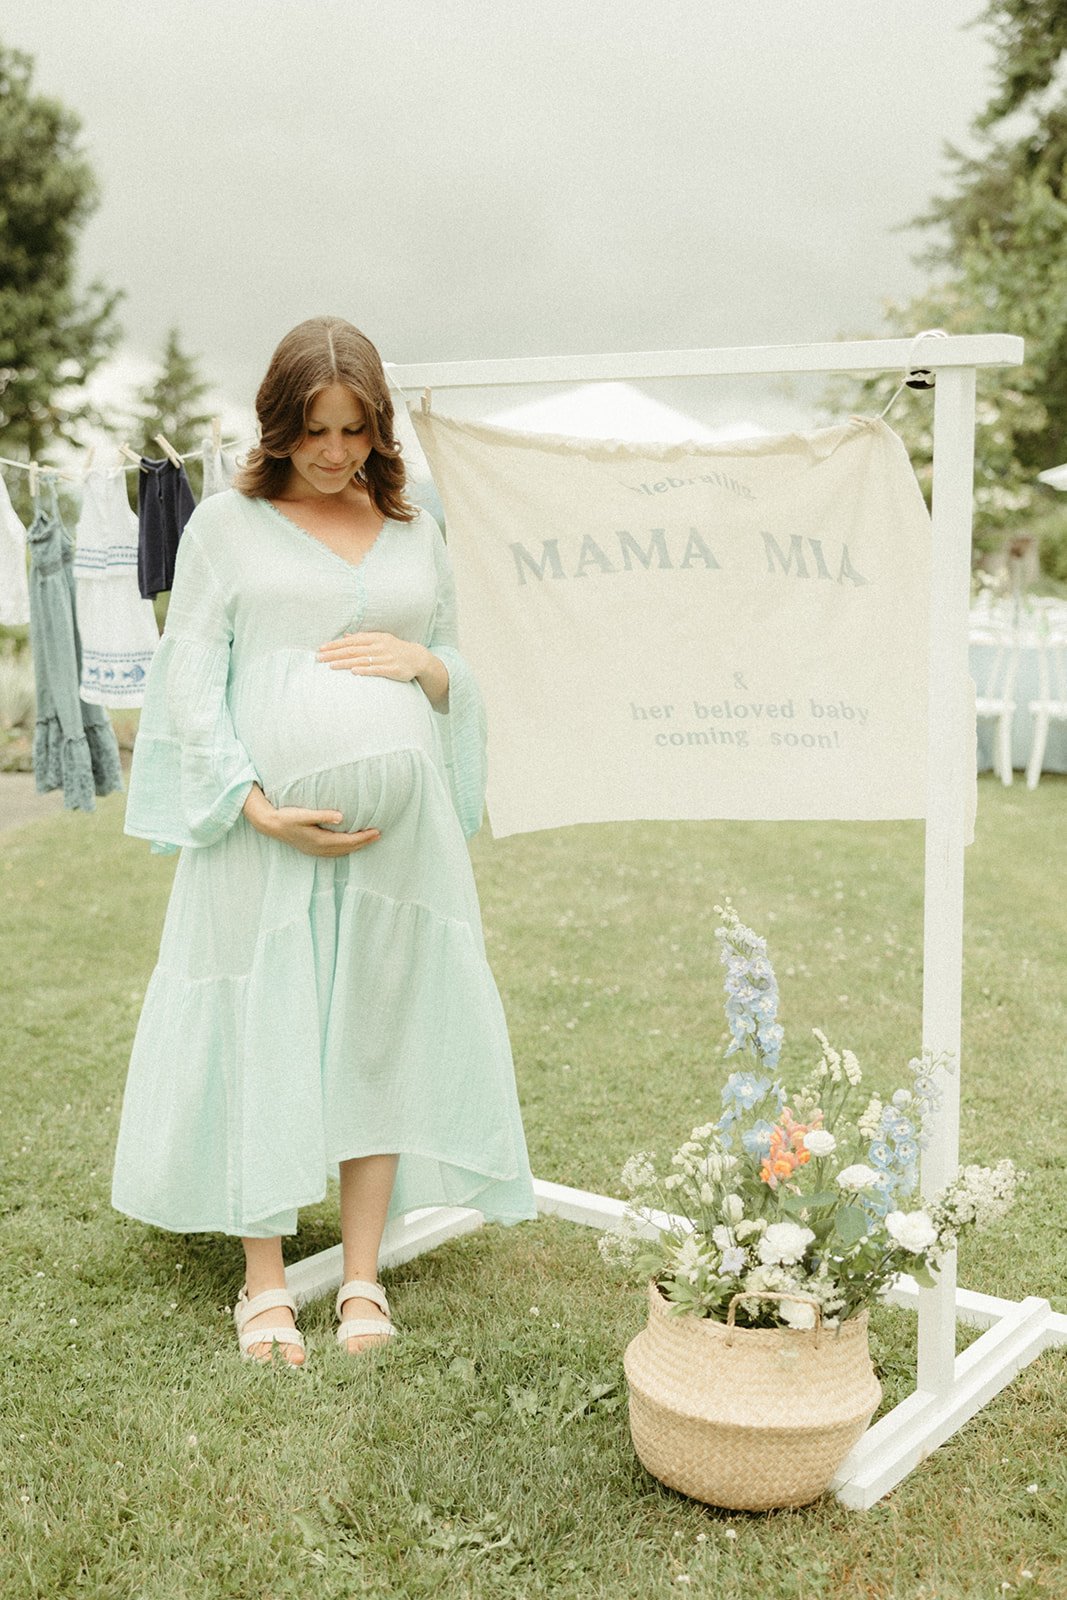 mama-mia-baby-shower-events-by-elle-bre-poole-photography-63.jpg